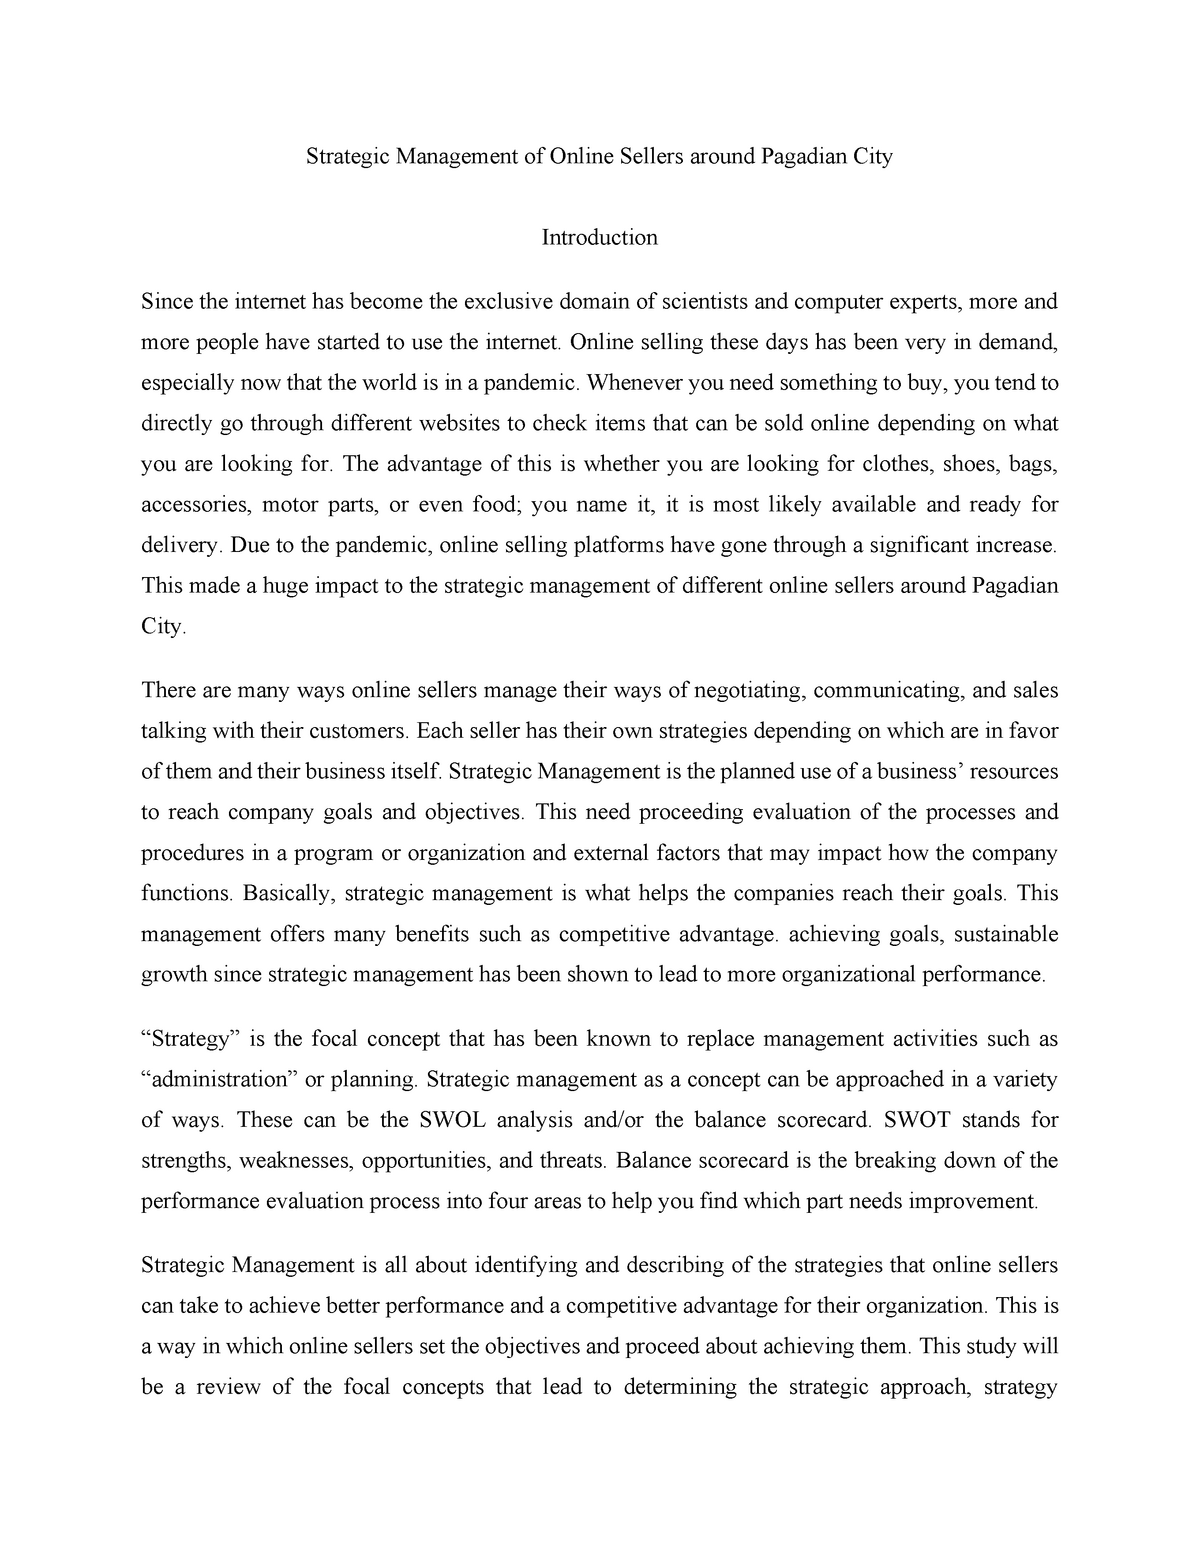 research paper about strategic management of online sellers